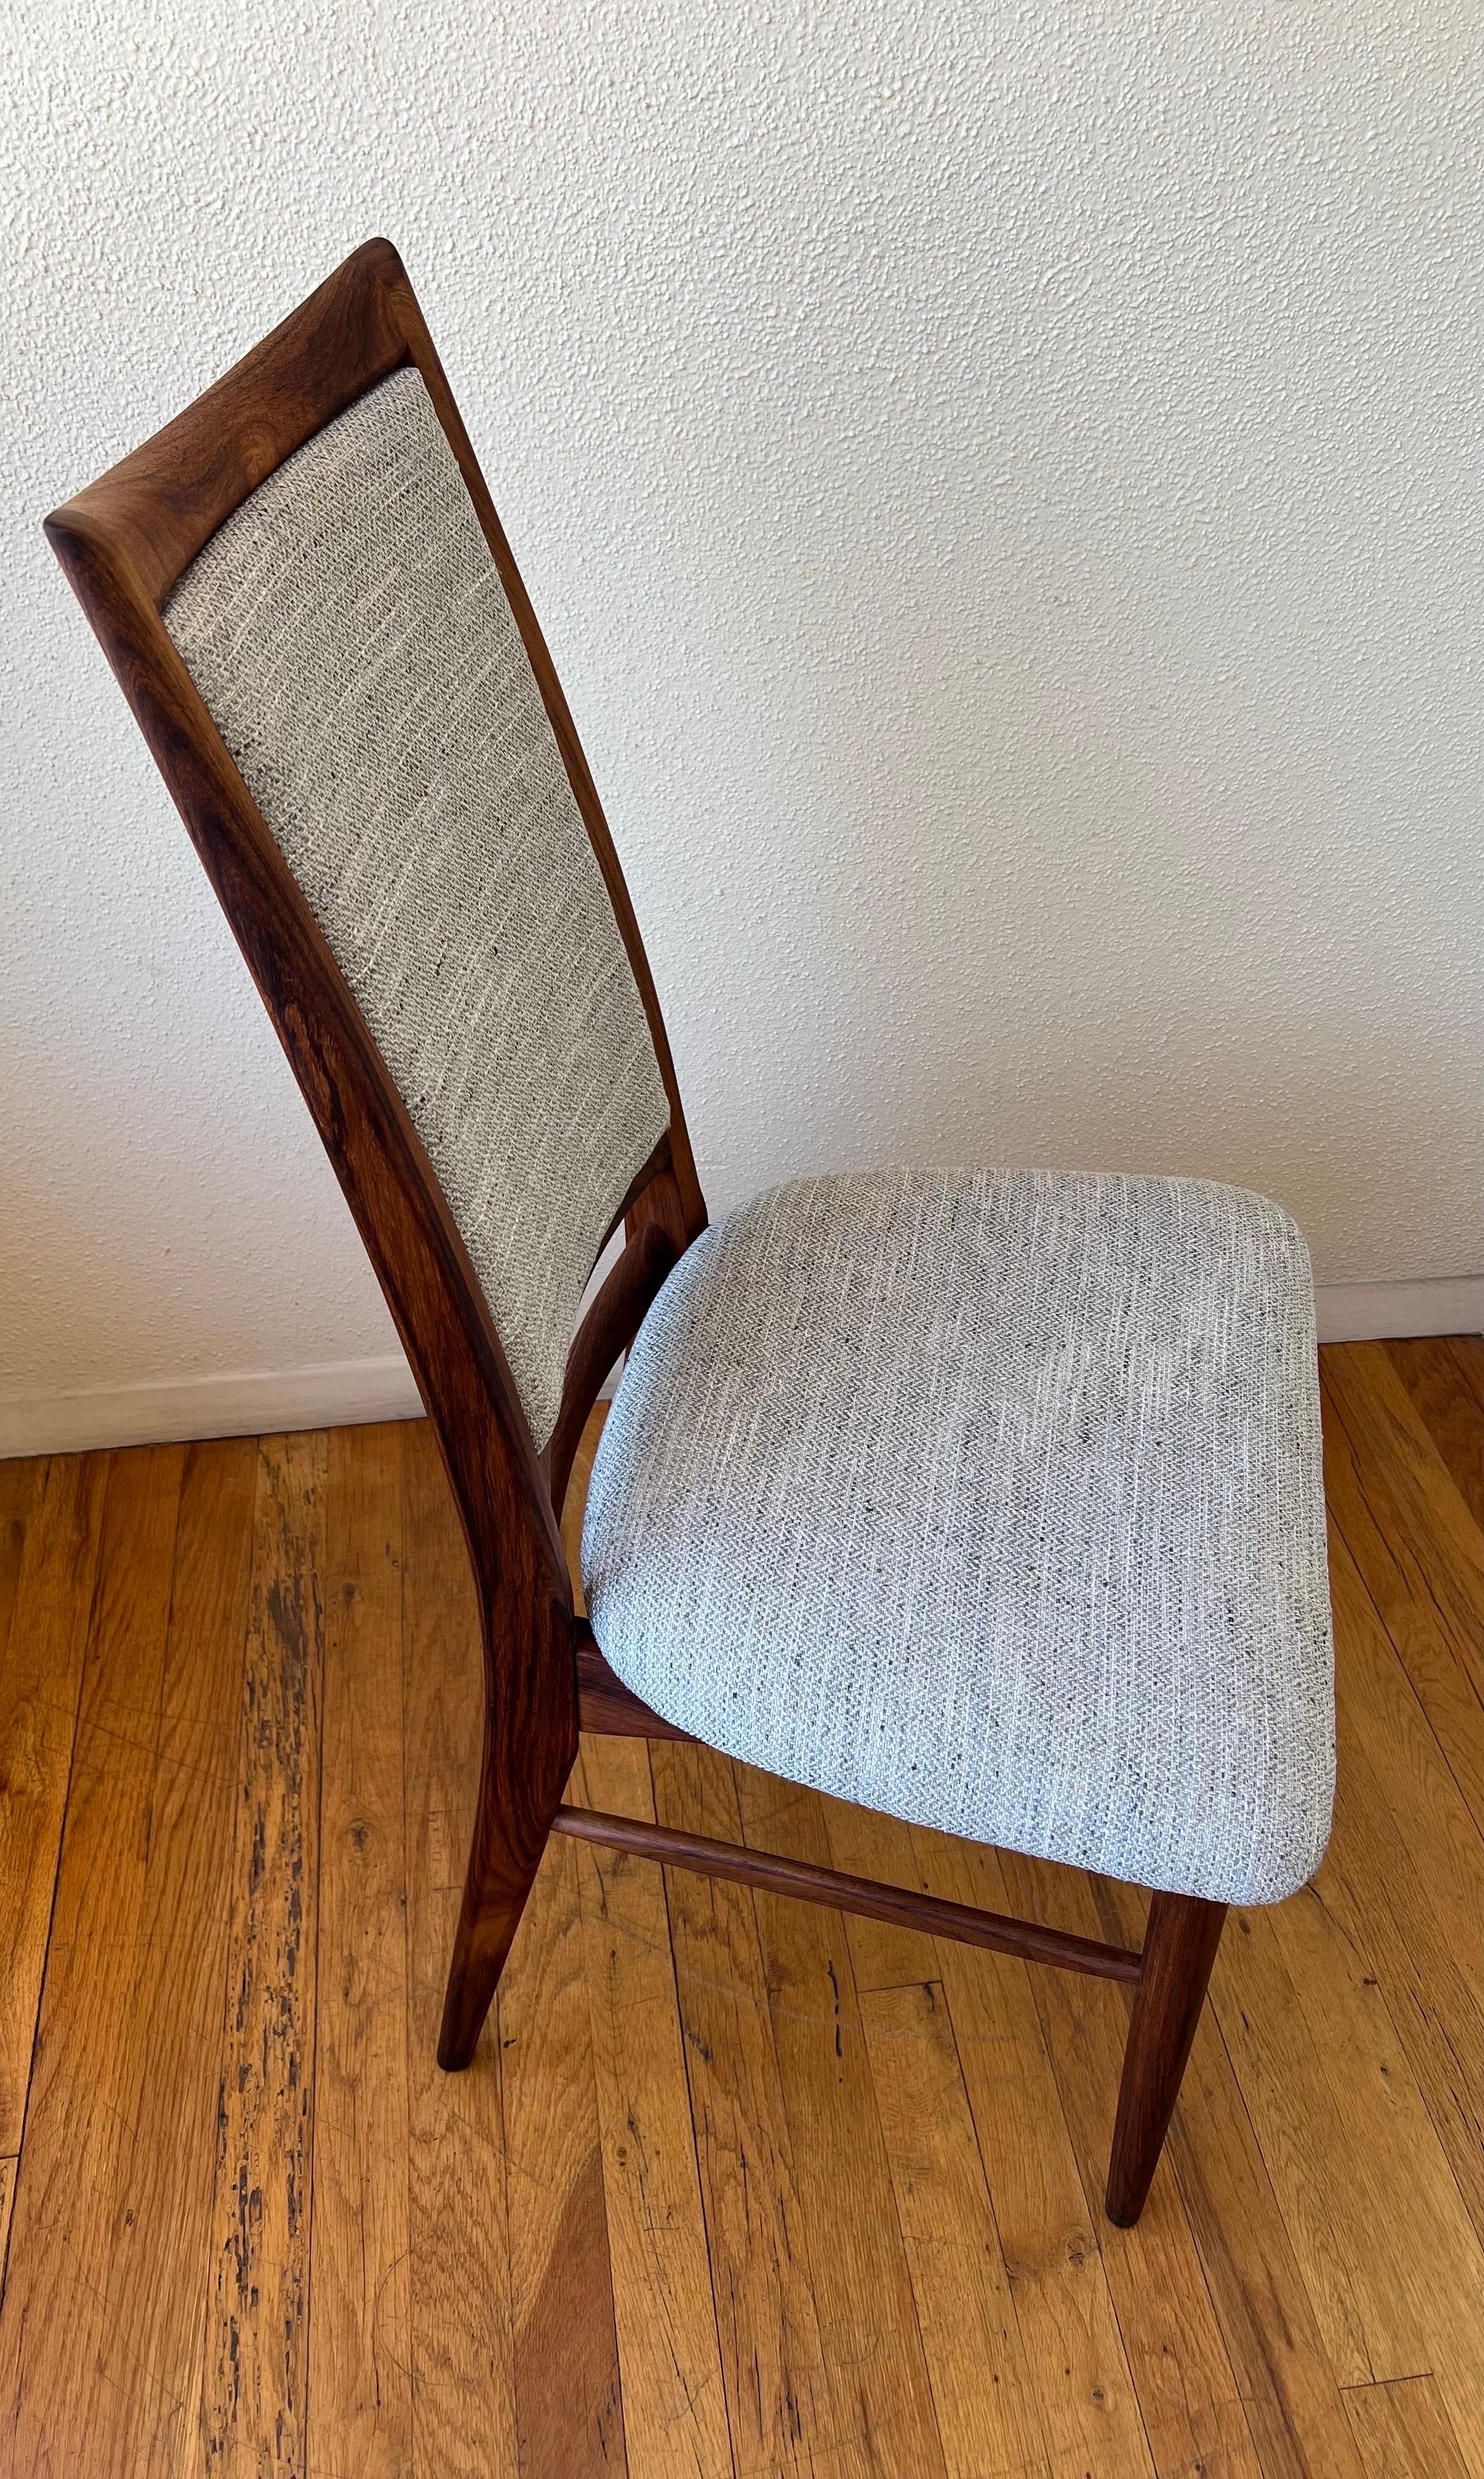 Single Rare Solid Rosewood Danish Modern Niels Koefoed Desk Chair In Excellent Condition For Sale In San Diego, CA